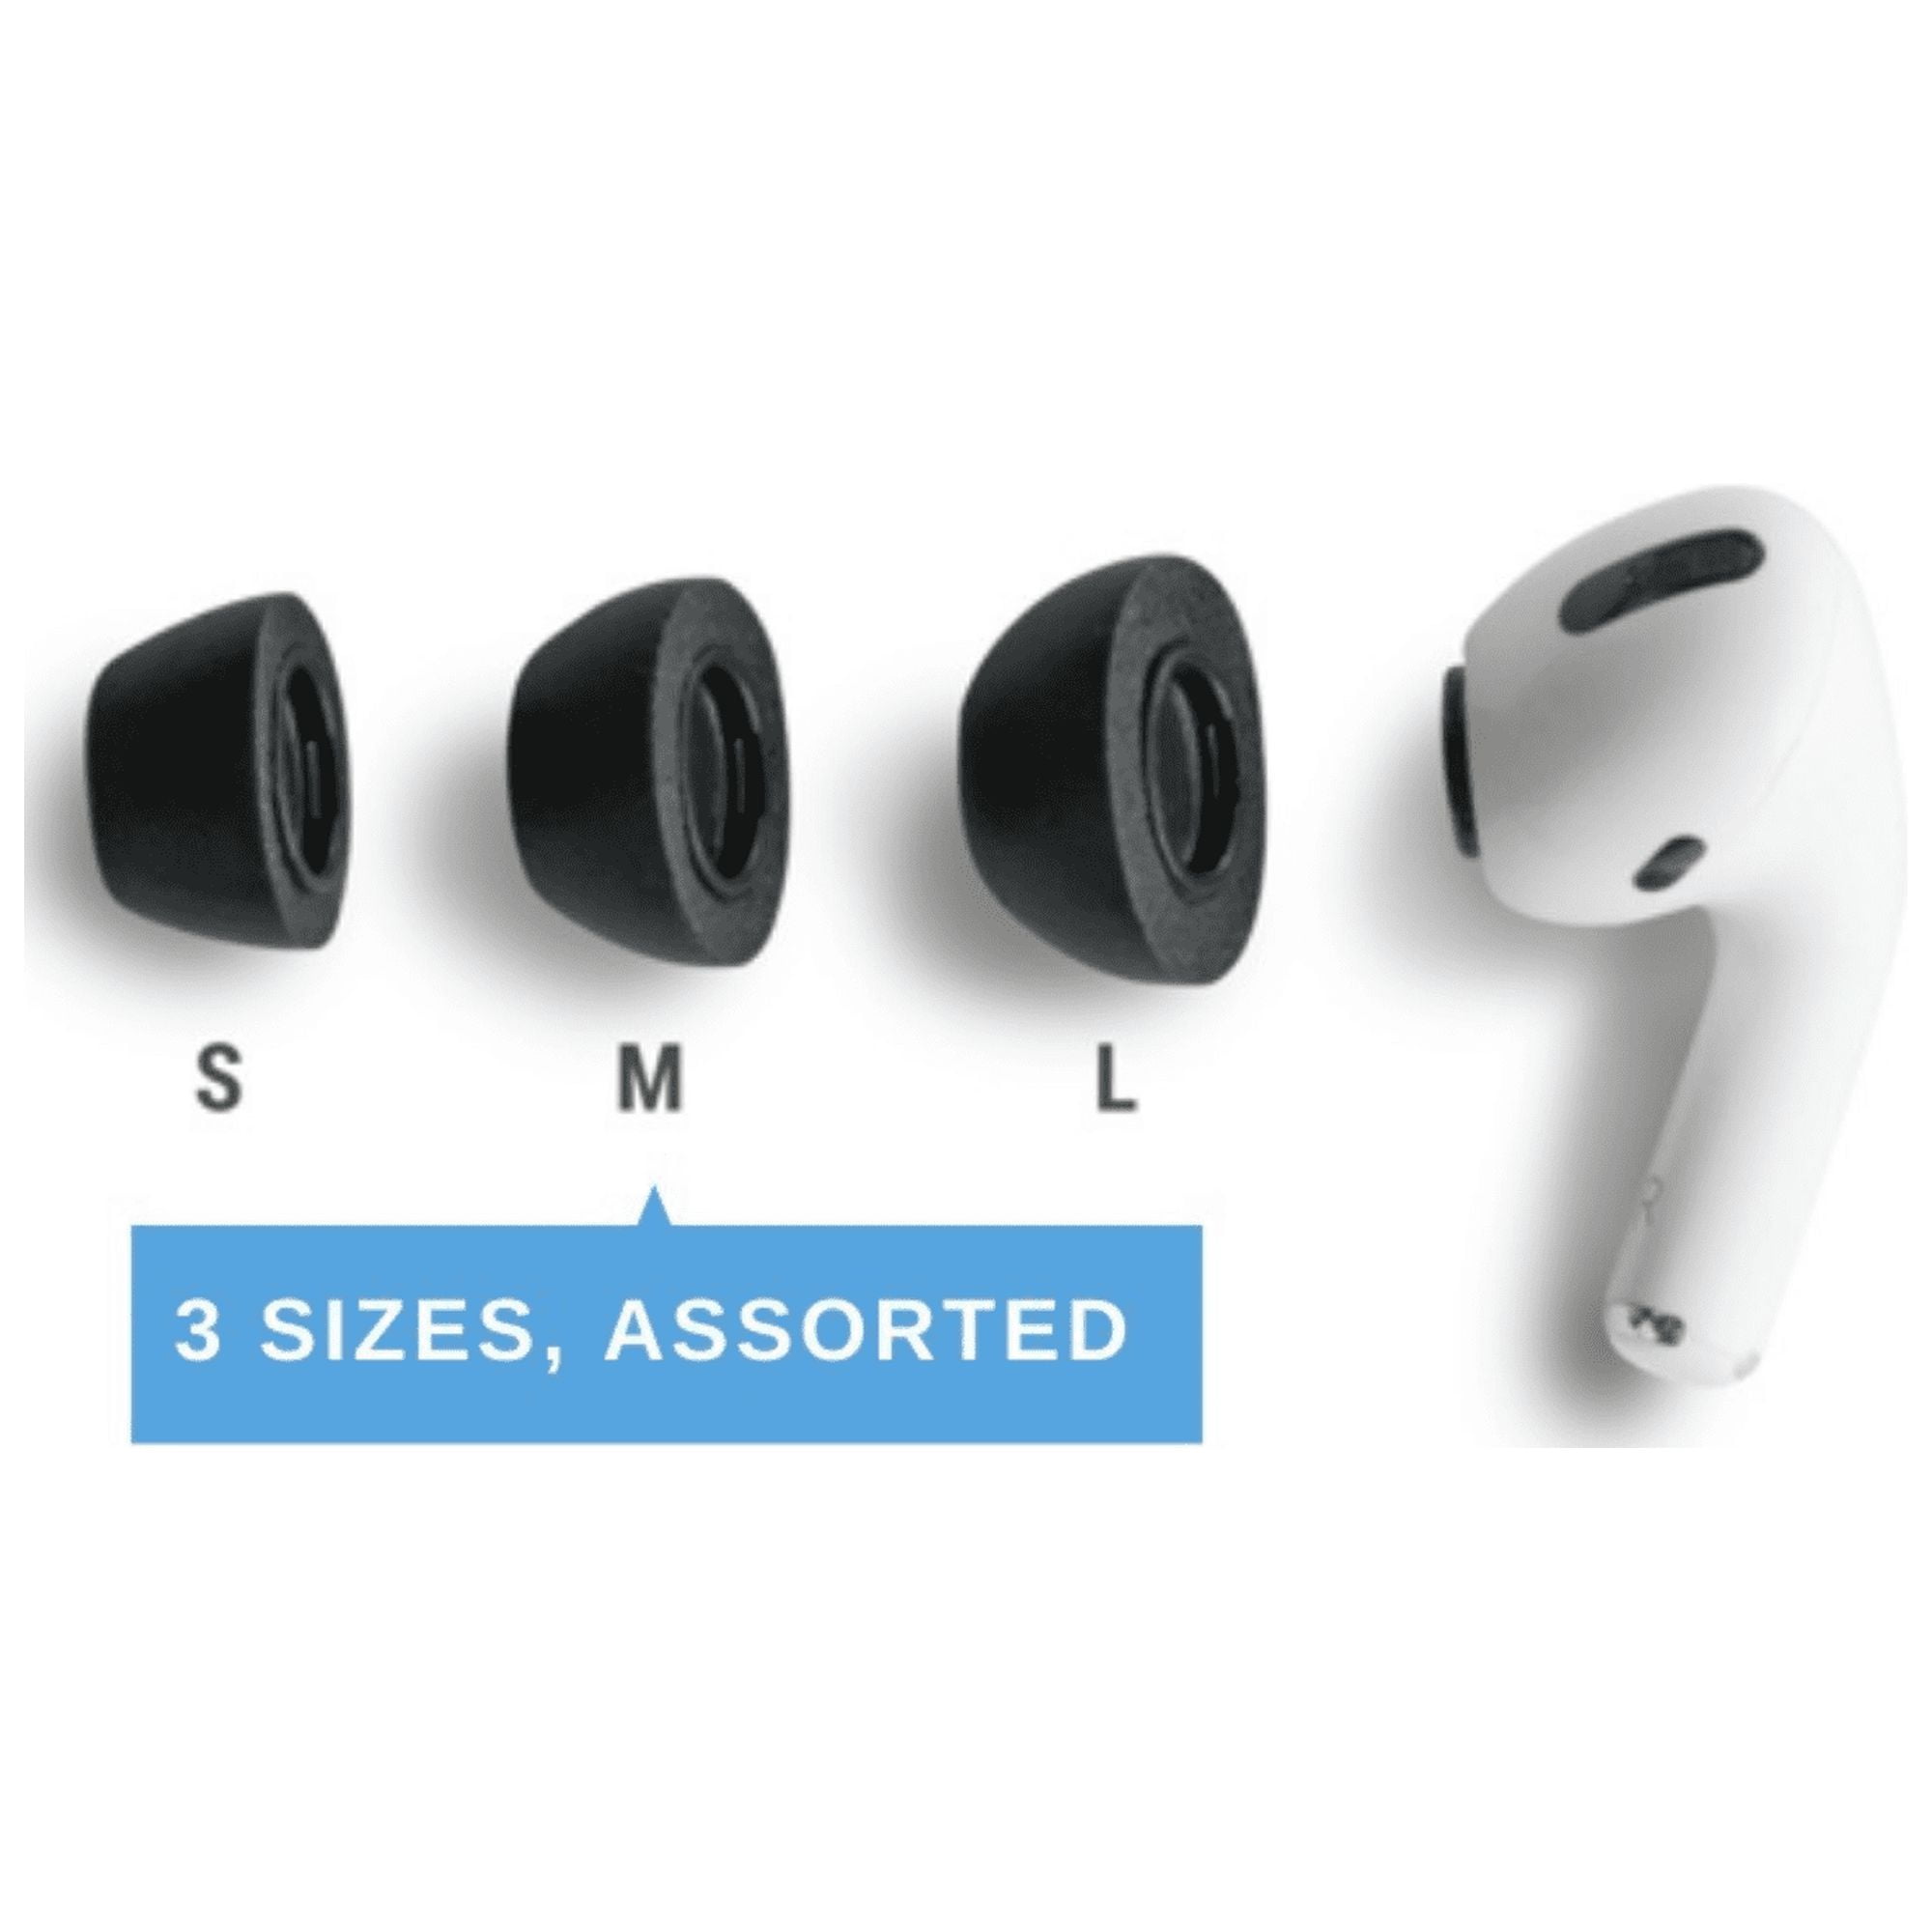  COMPLY SoftCONNECT Soft Foam Replacement Earphone Tips for  Apple AirPods (Gen. 1 & 2), Apple Earpods, and Comparable Headphones  (Large, 2 Pairs) : Electronics